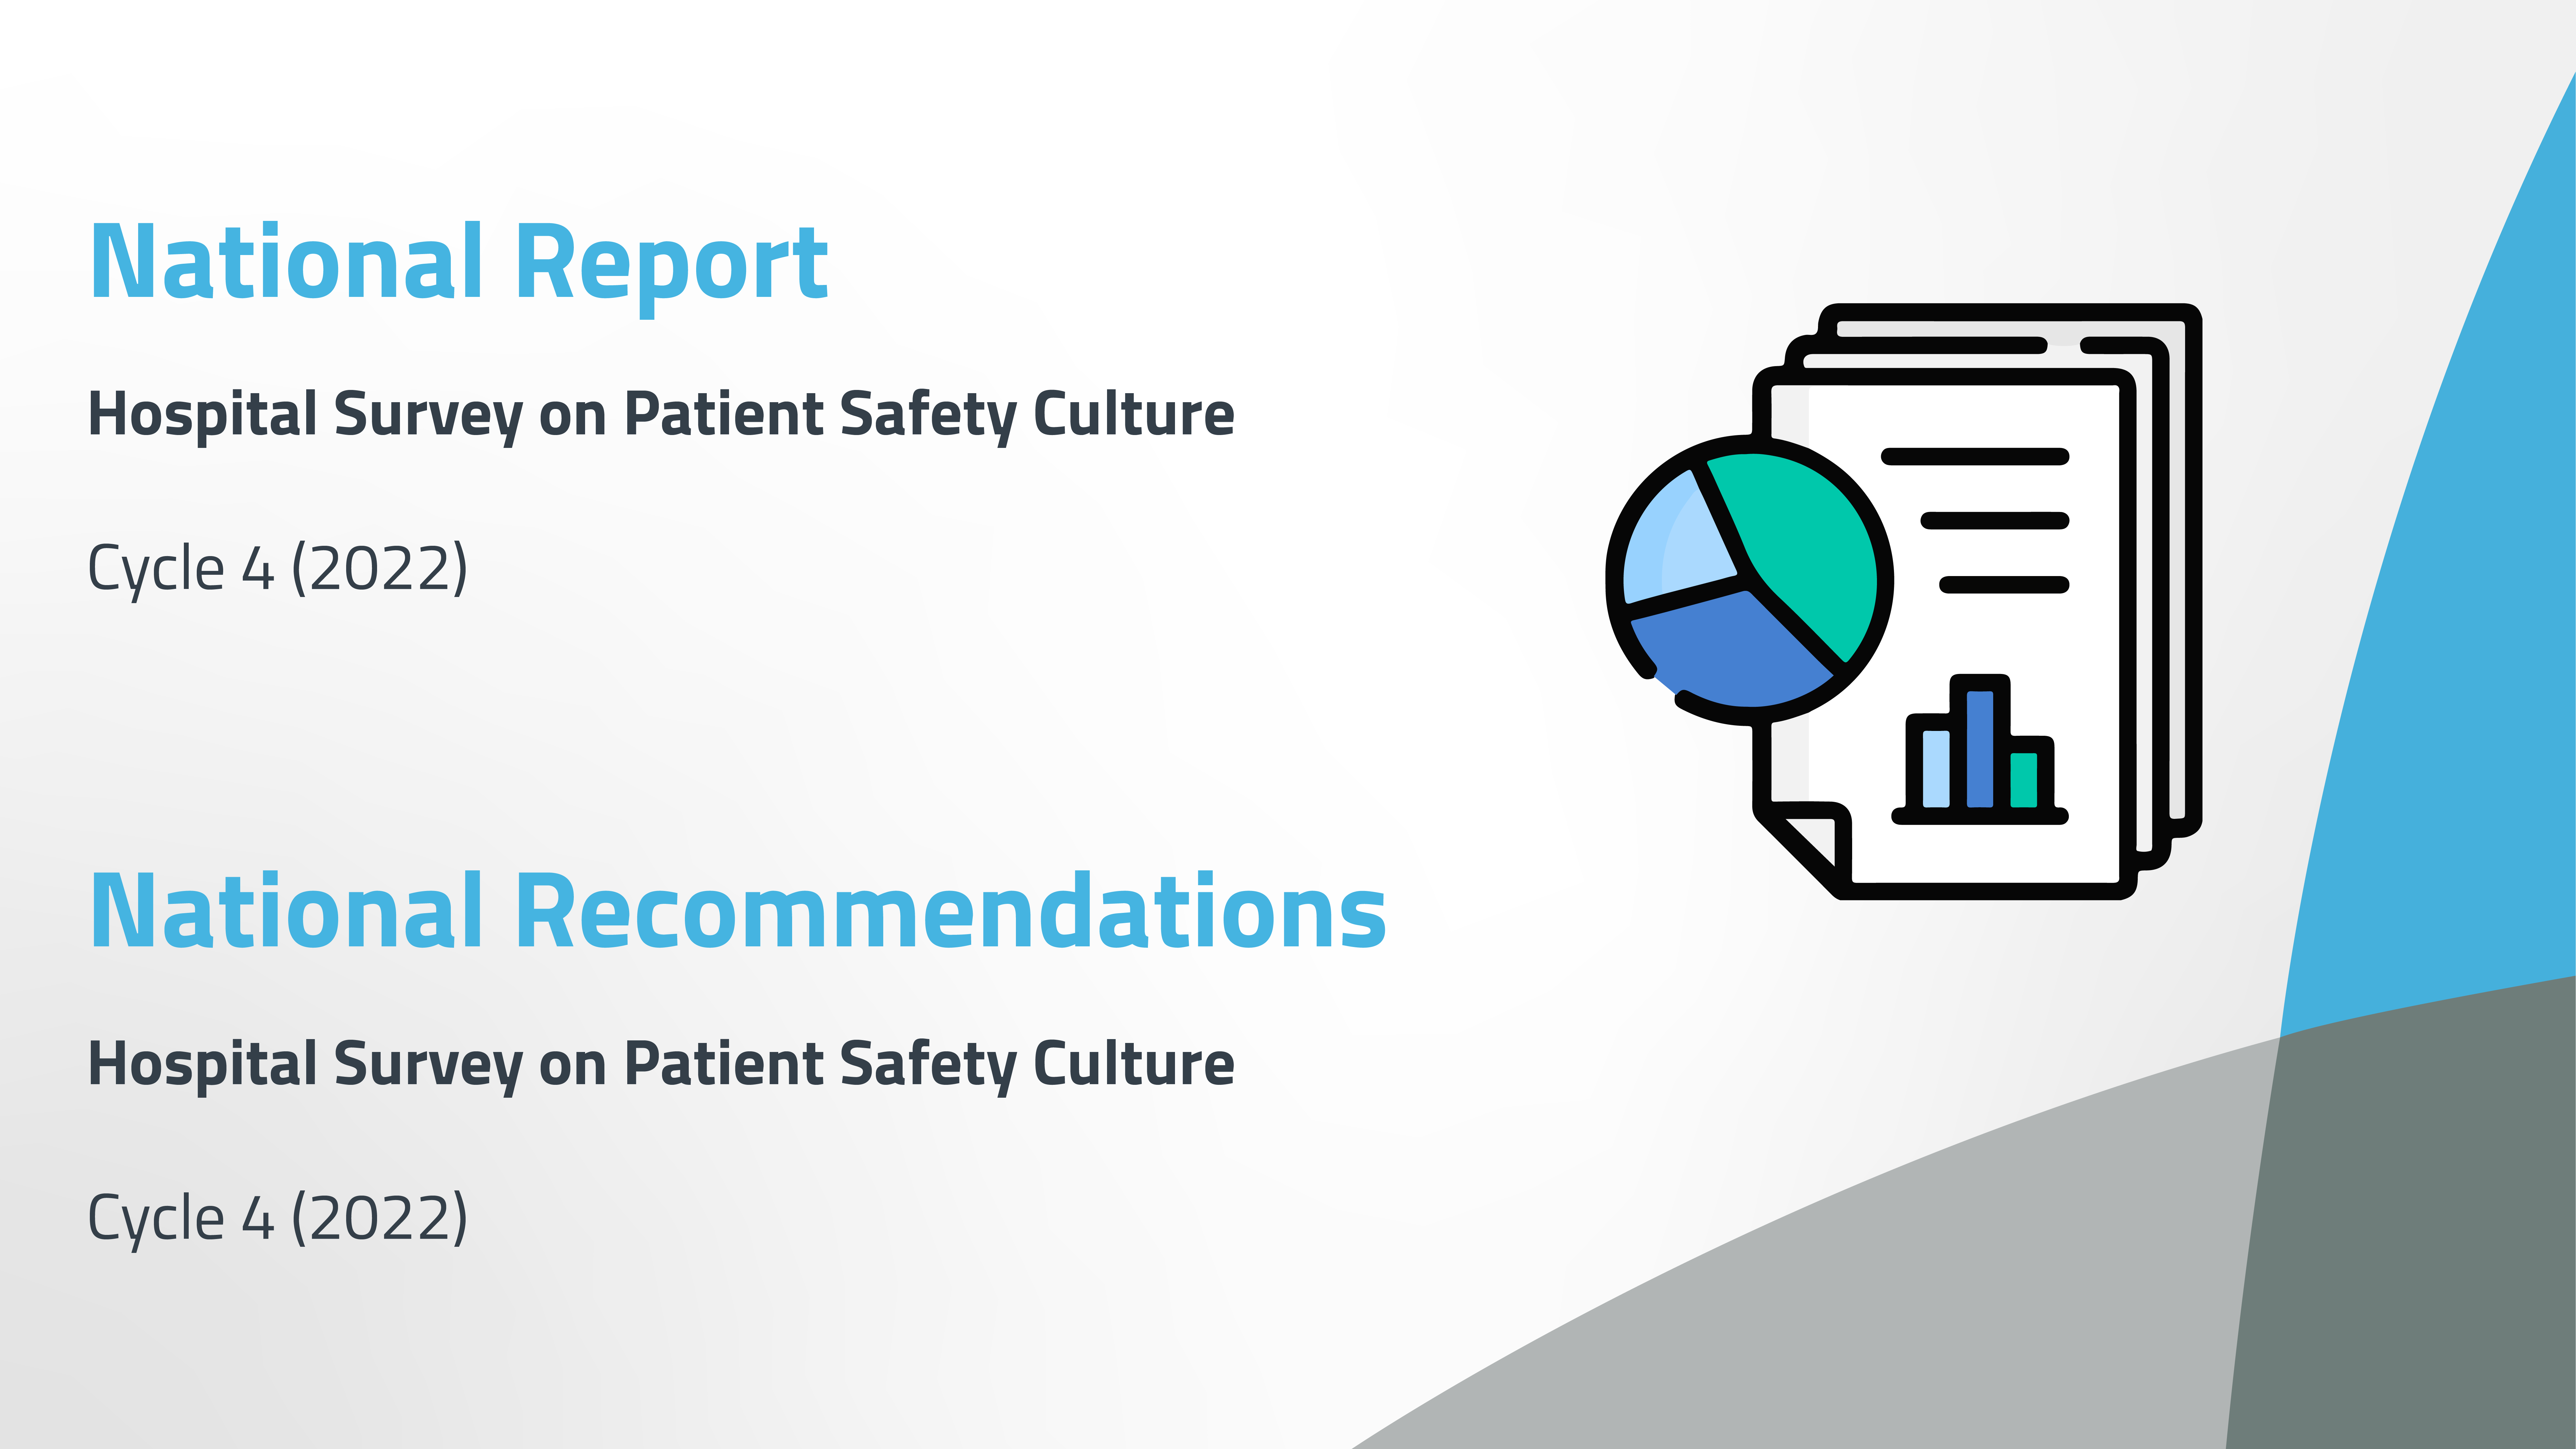 National Report and Recommendations for Hospital Survey on Patient Safety Culture Cycle 4: (2022)